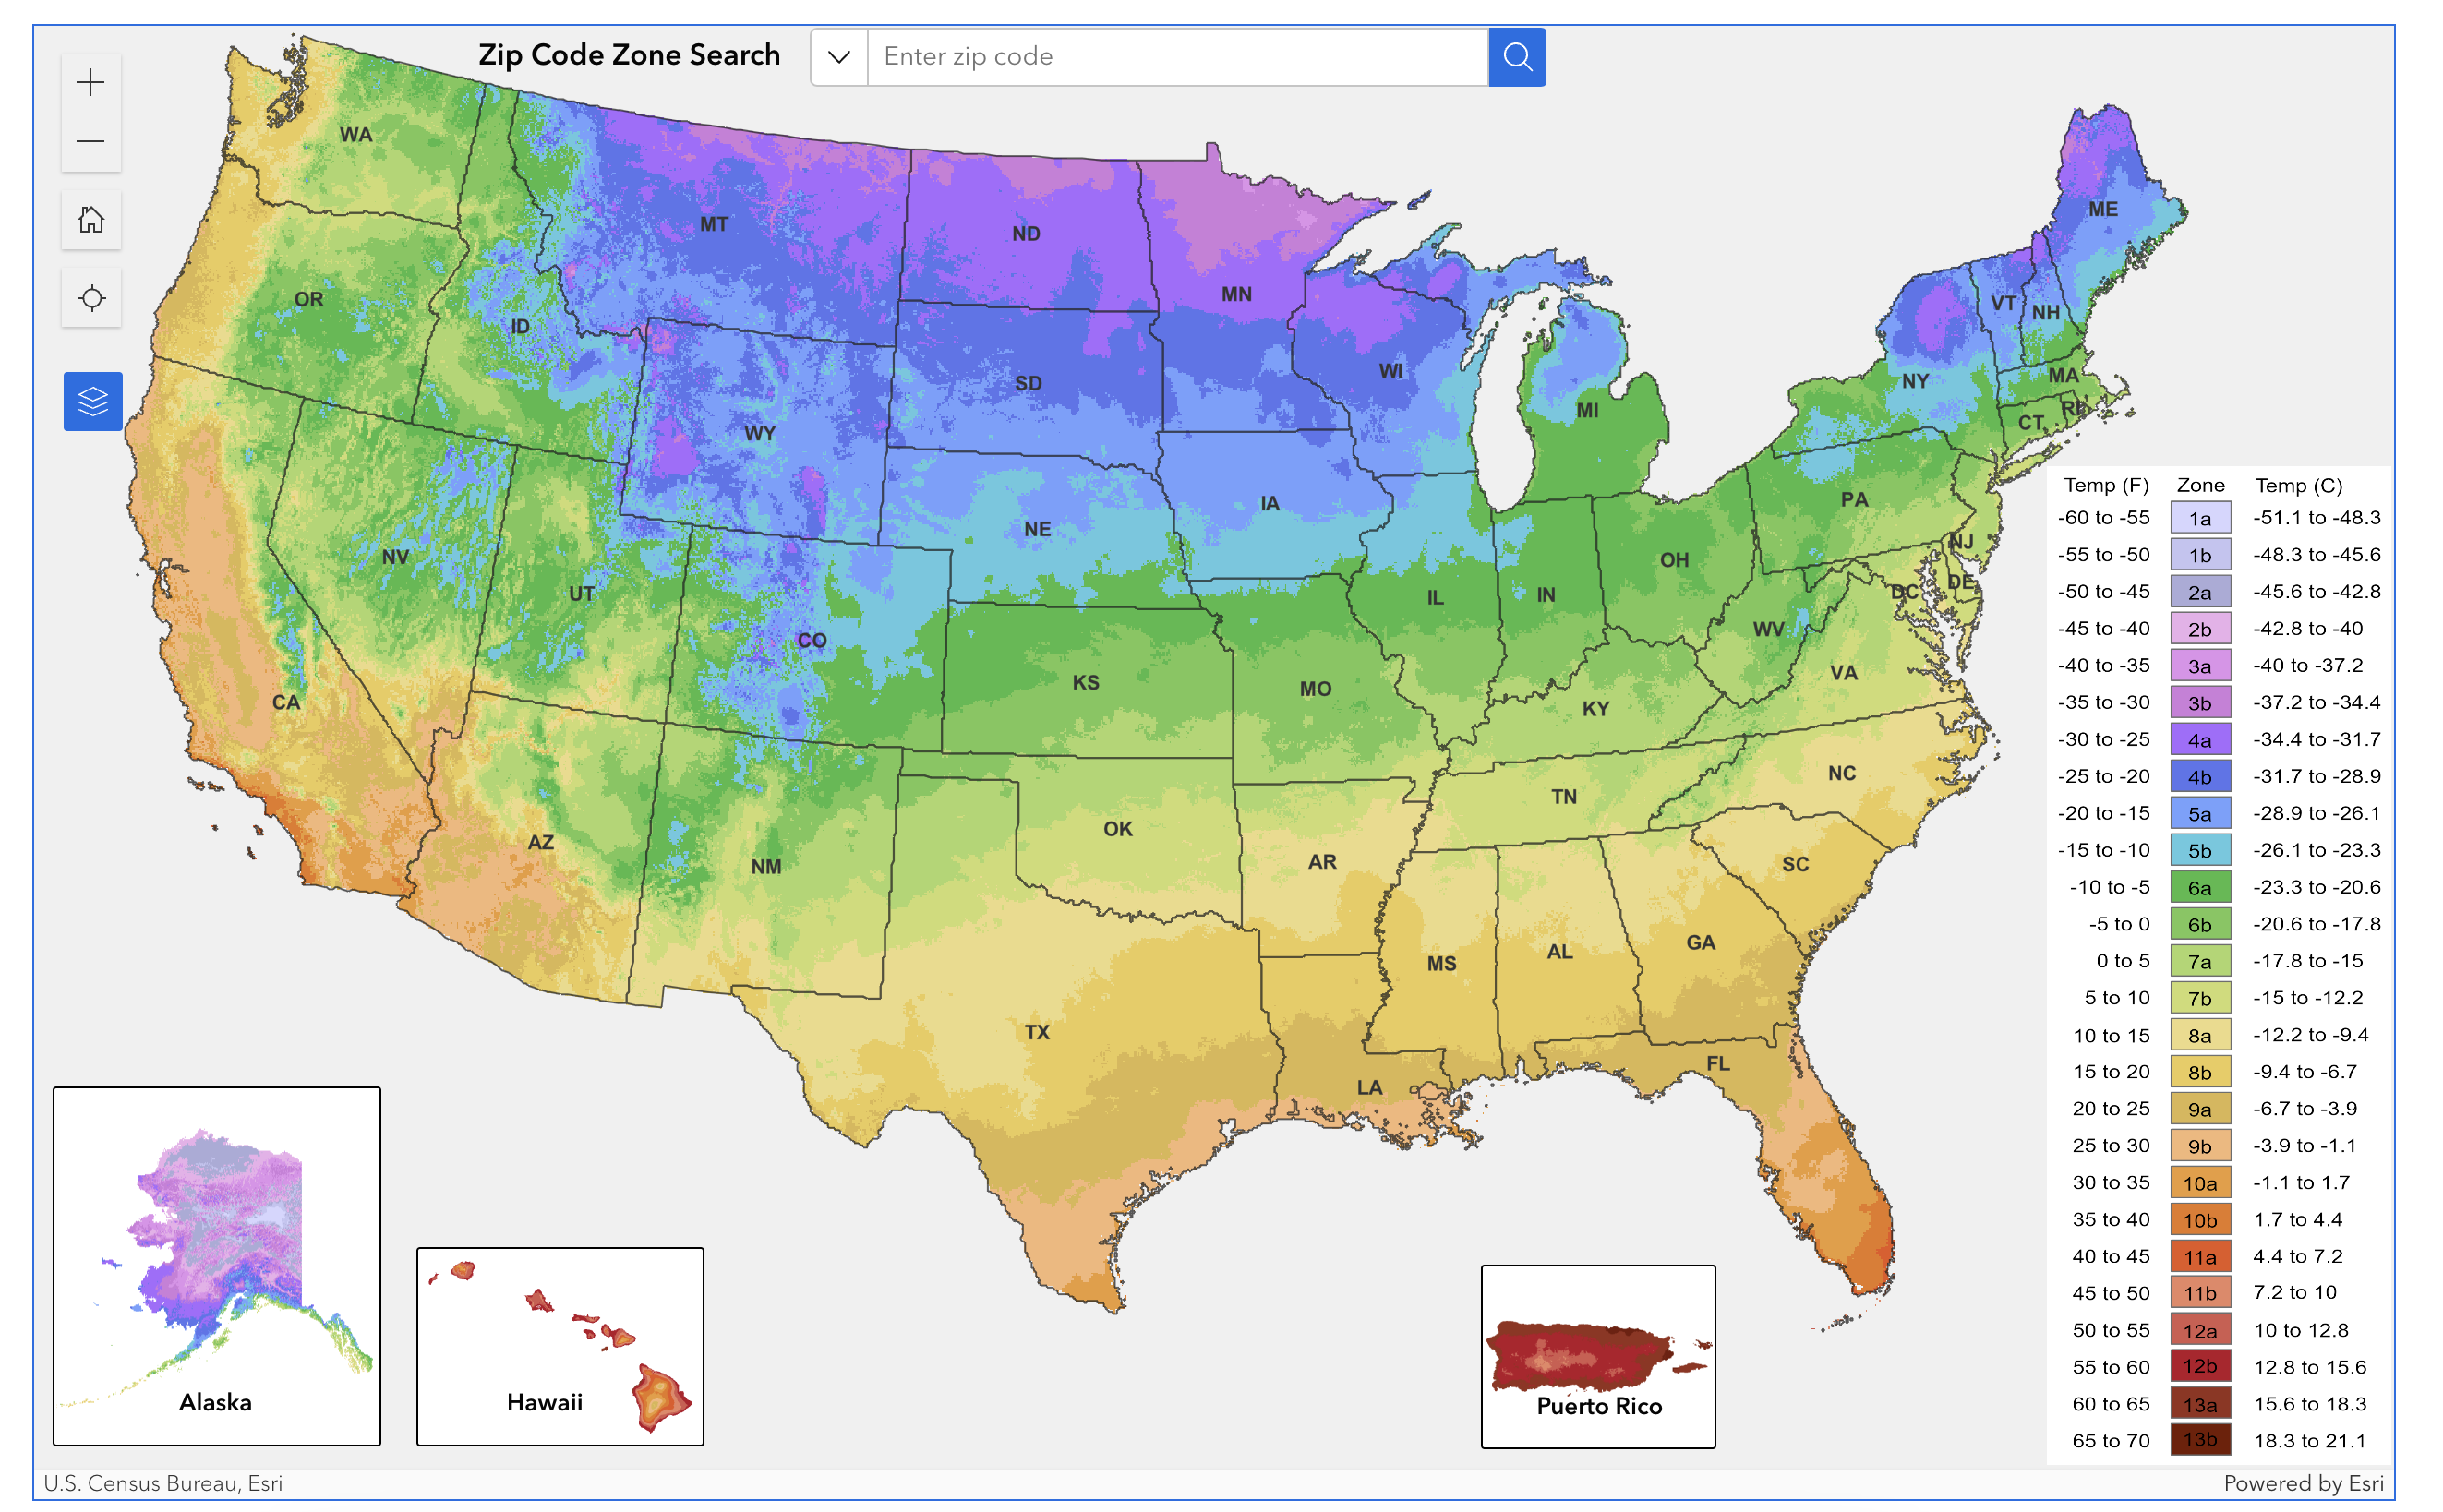 Updated plant hardiness map from the U.S. Department of Agriculture.